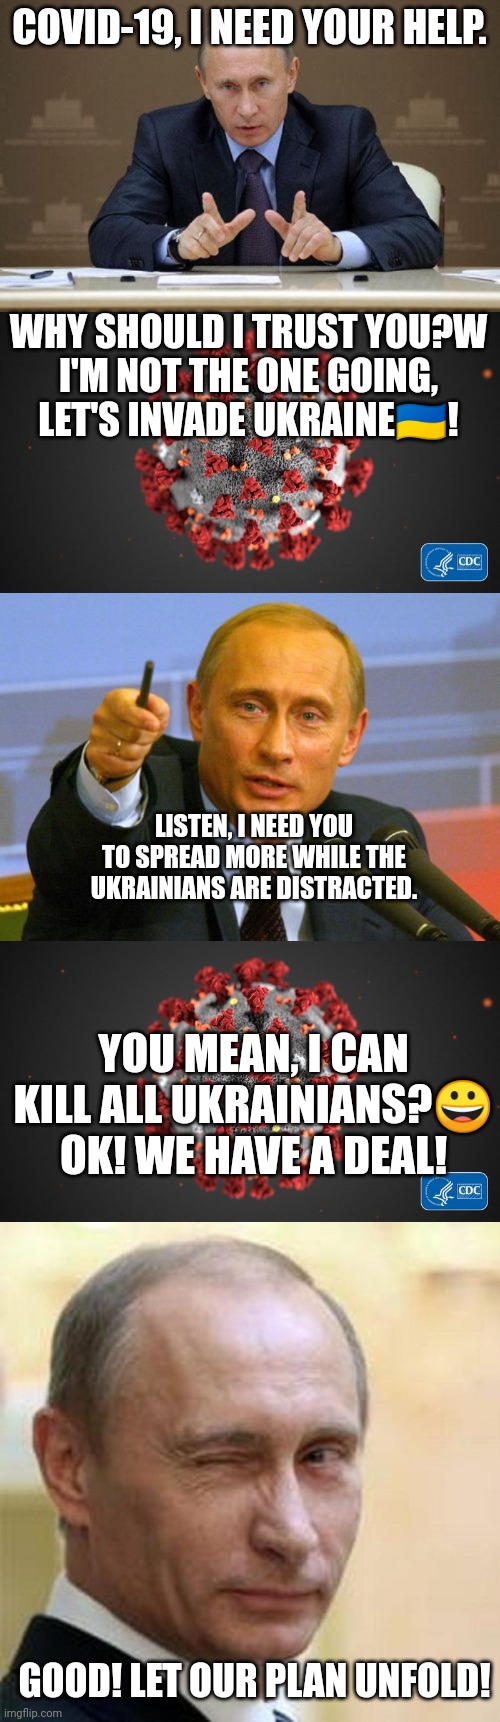 I don't like the way this is going! |  COVID-19, I NEED YOUR HELP. WHY SHOULD I TRUST YOU?W
I'M NOT THE ONE GOING, LET'S INVADE UKRAINE🇺🇦! LISTEN, I NEED YOU TO SPREAD MORE WHILE THE UKRAINIANS ARE DISTRACTED. YOU MEAN, I CAN KILL ALL UKRAINIANS?😀 OK! WE HAVE A DEAL! GOOD! LET OUR PLAN UNFOLD! | image tagged in memes,vladimir putin,covid 19,good guy putin,putin winking | made w/ Imgflip meme maker